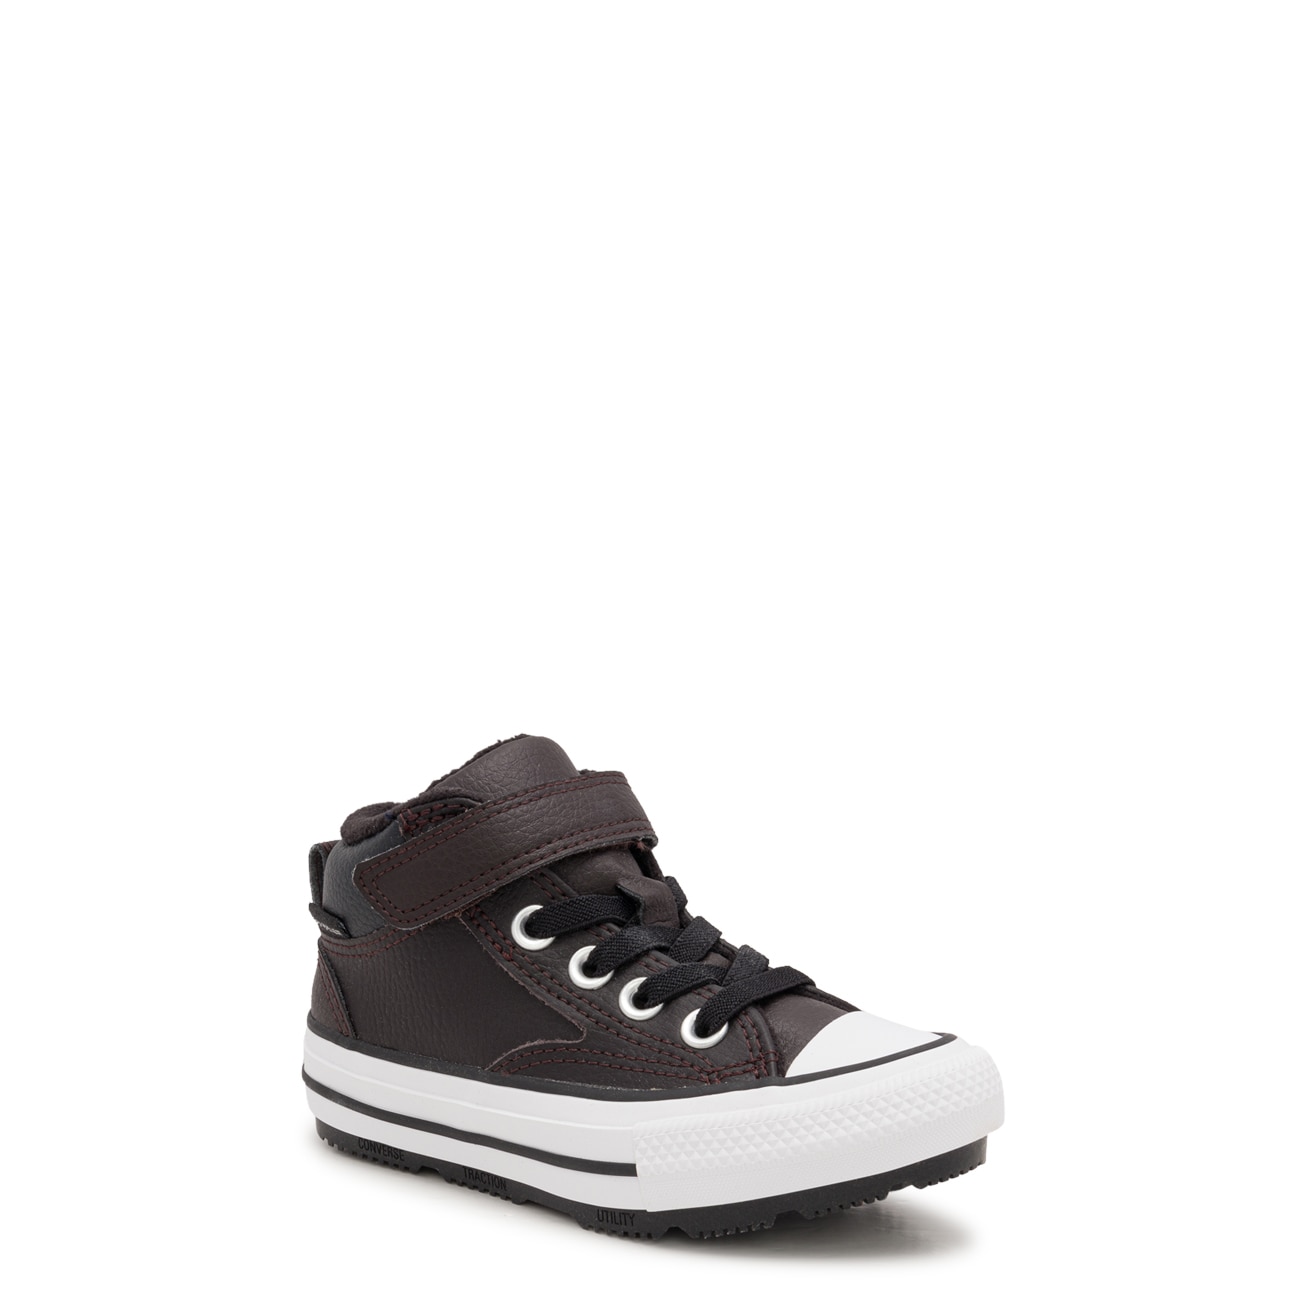 Youth Boys' Chuck Taylor All Star Easy On Malden Sneaker